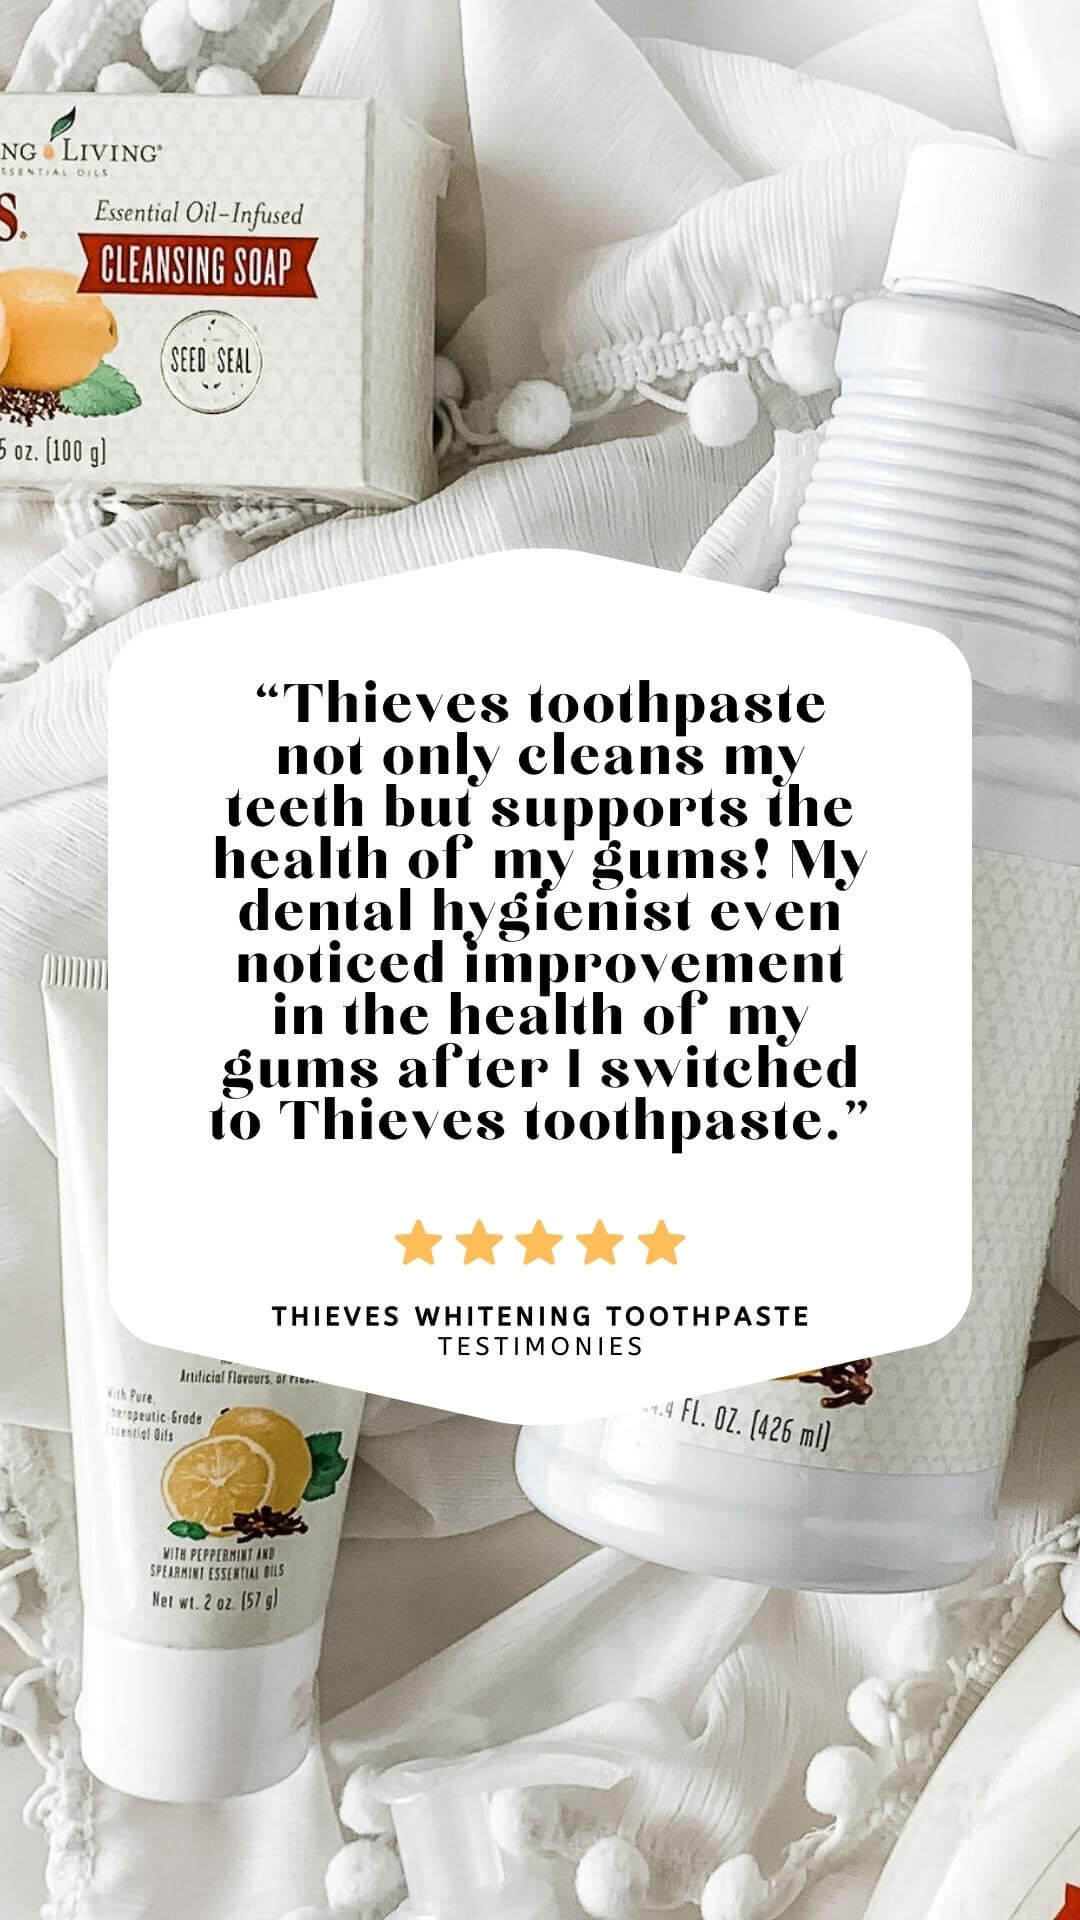 order thieves toothpaste with young living with a coupon code